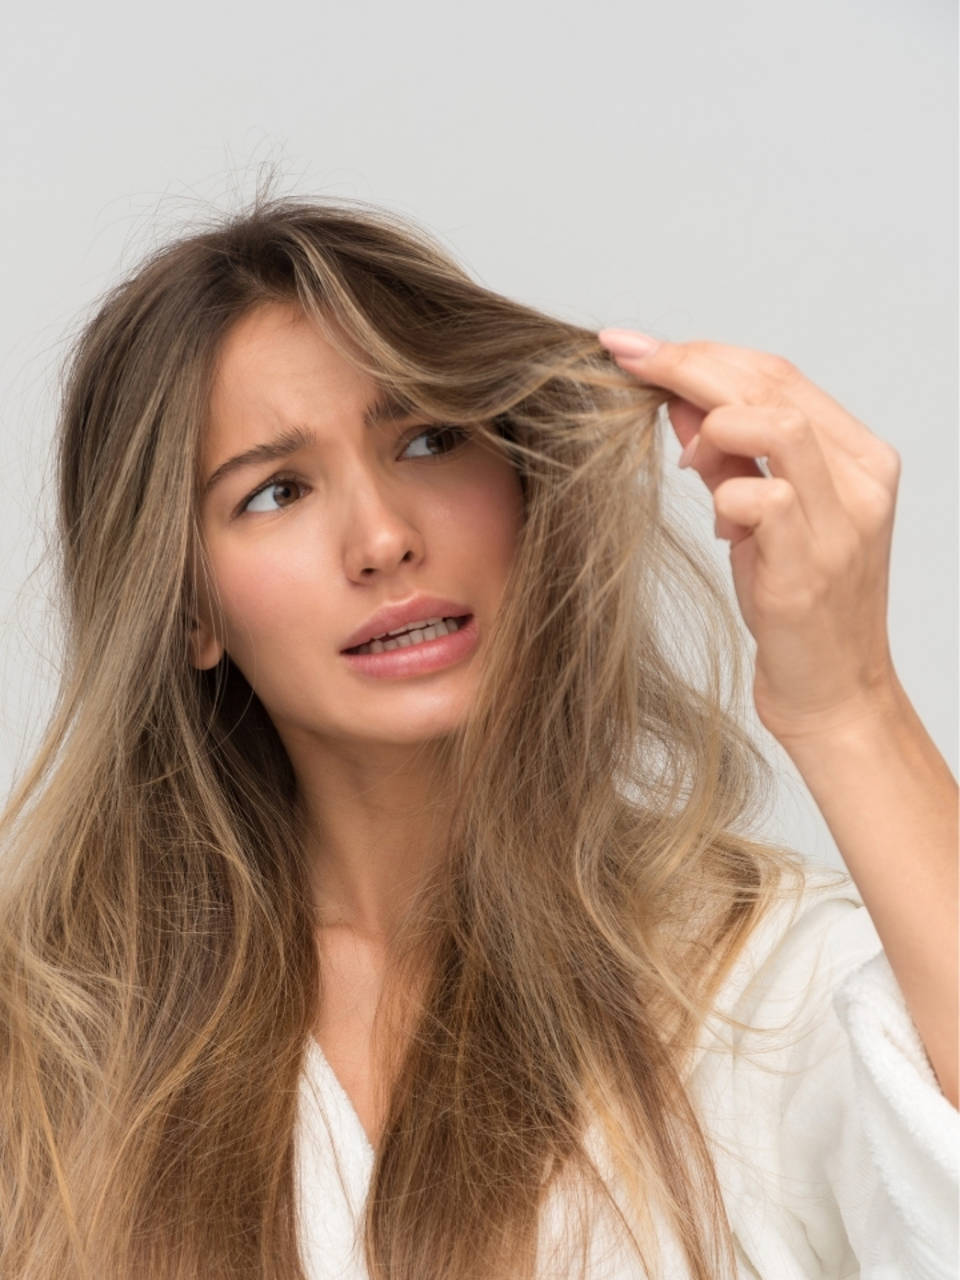 Miracle home remedies for dry hair | Times of India